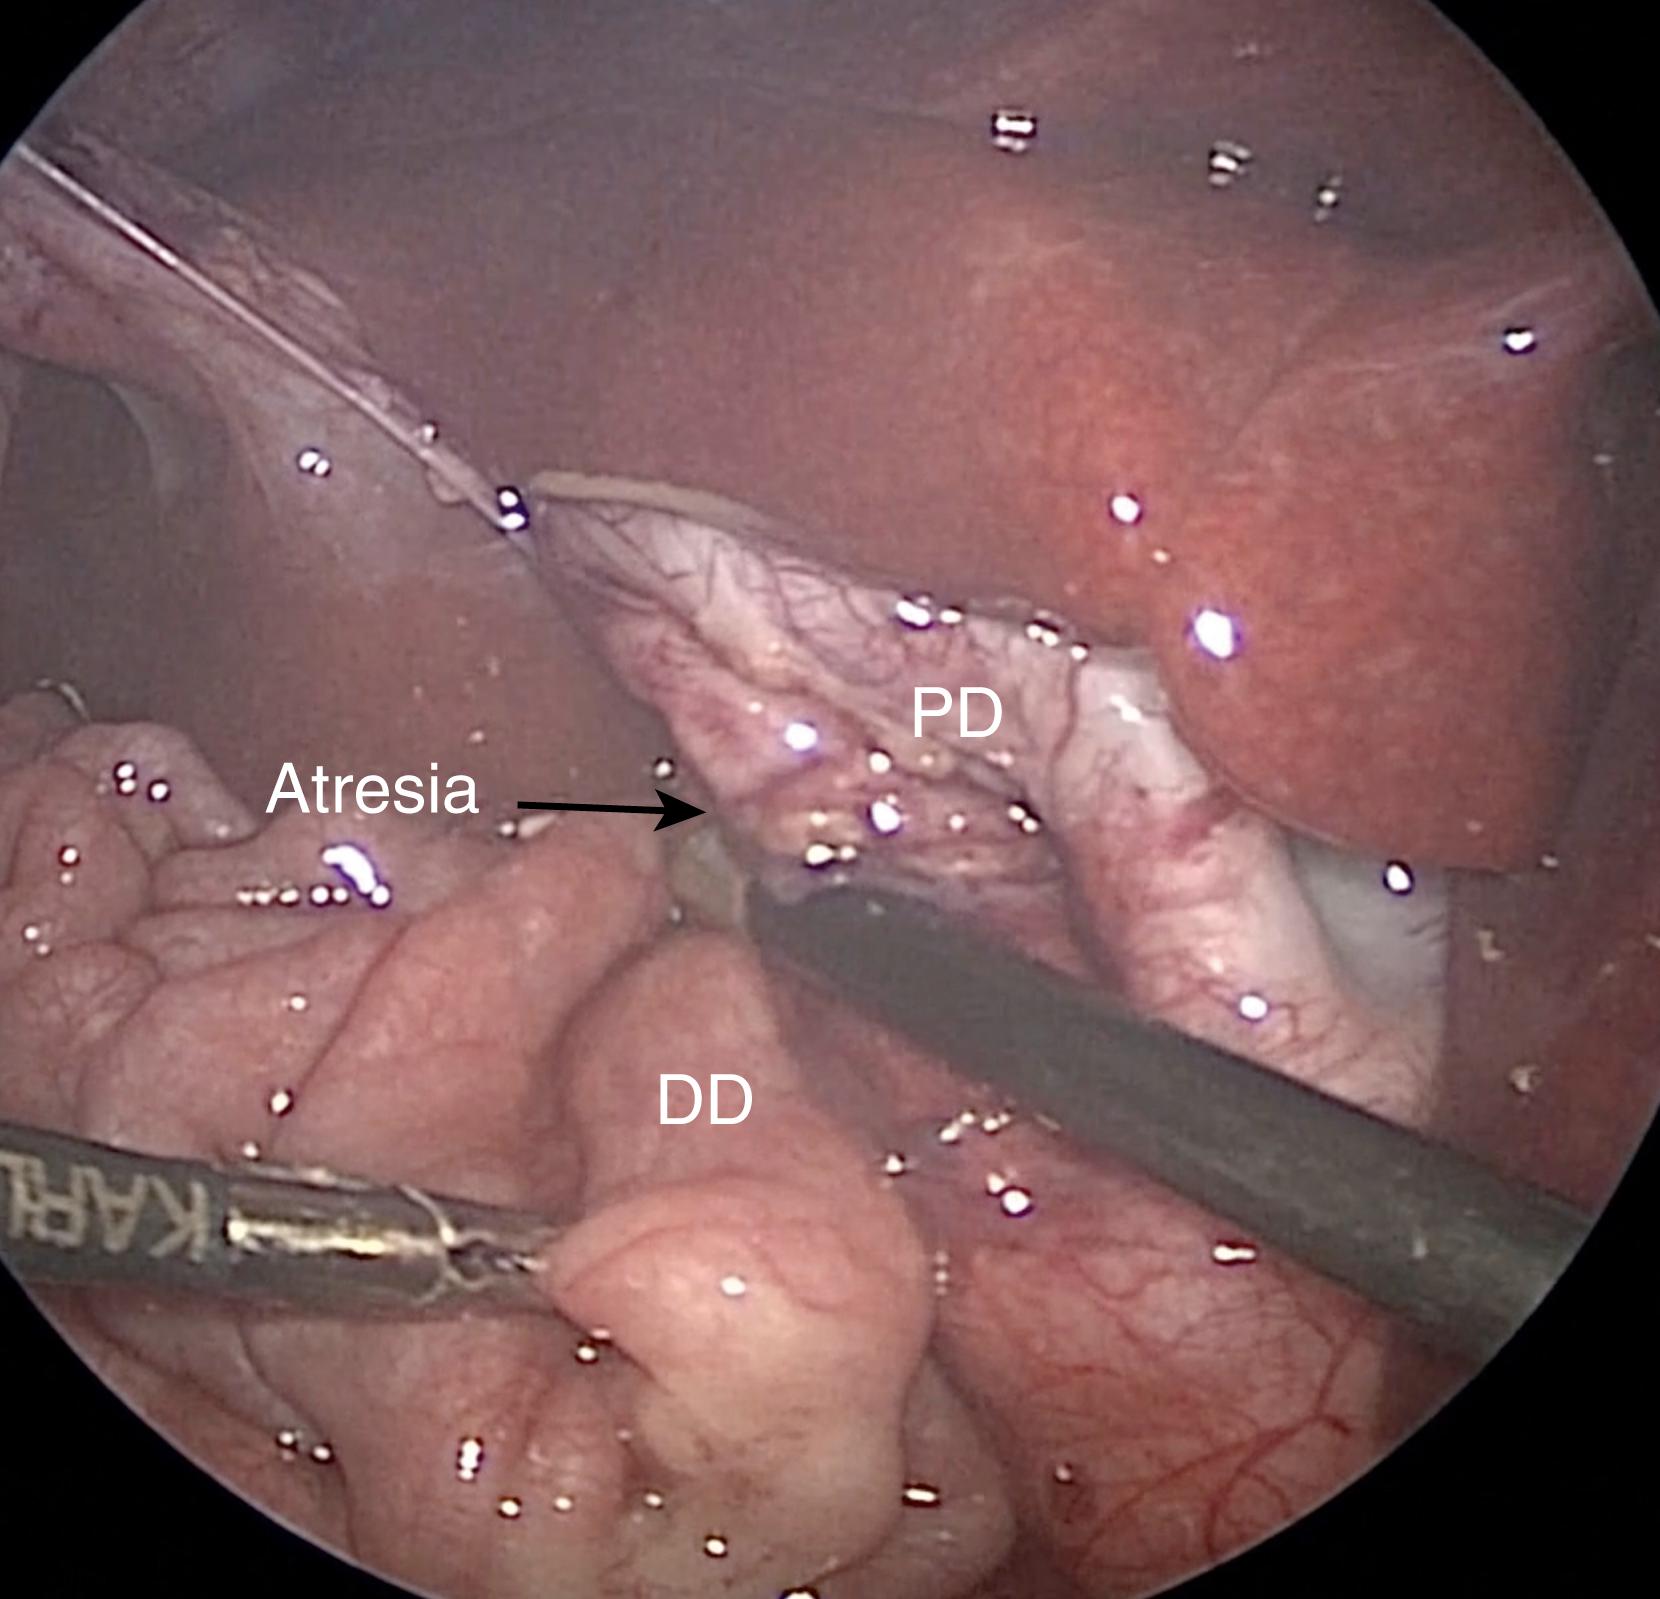 Fig. 6-4, The duodenum has been kocherized. The dilated proximal duodenum (PD) and small-caliber distal duodenum (DD) are seen.